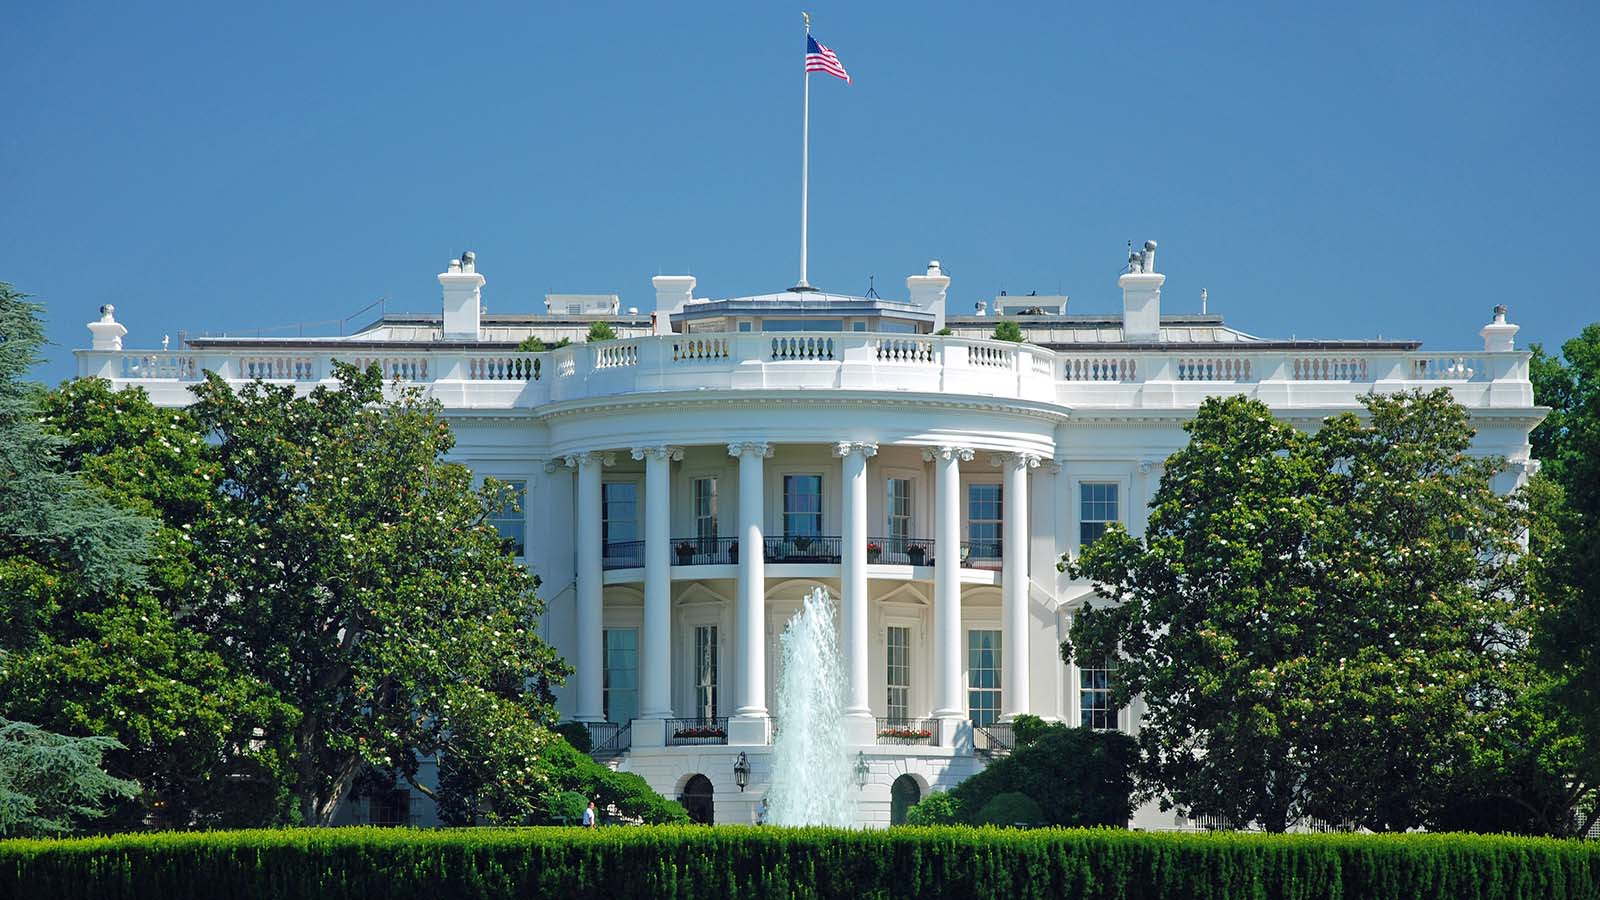 This Random Knowledge Quiz Is Easy If You’re Smart White House, Washington, D.C., United States